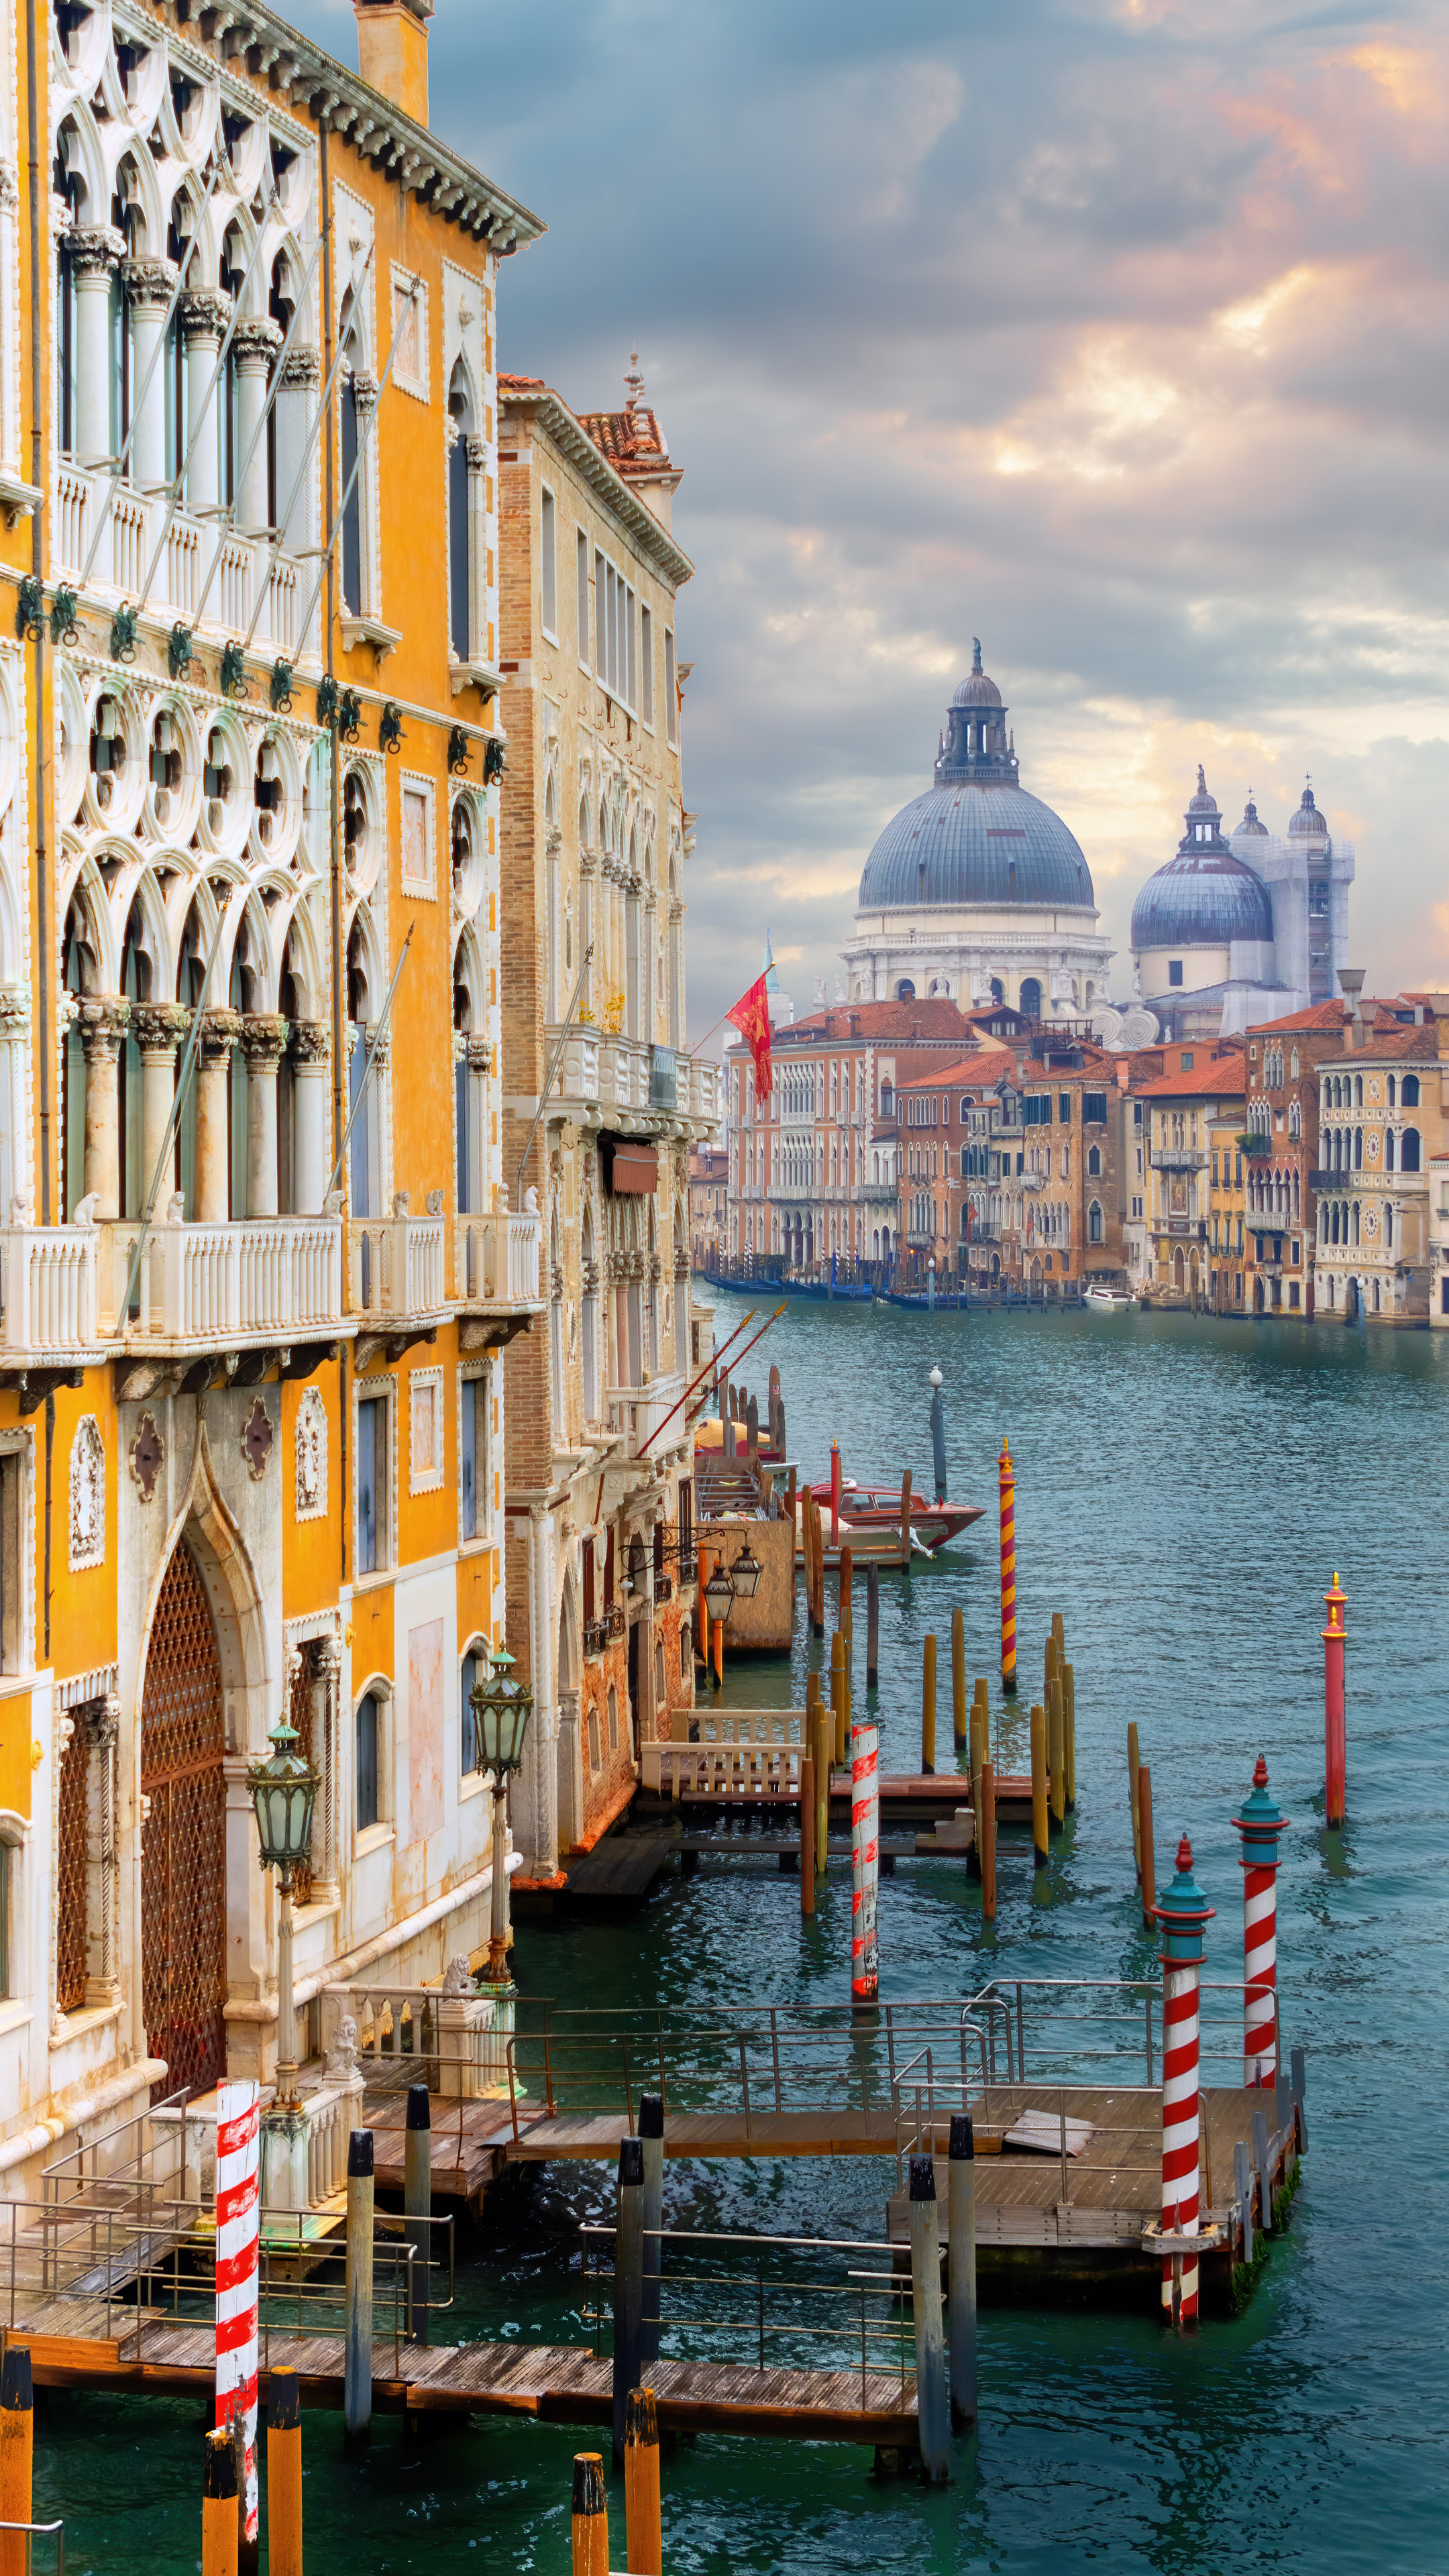 Transform your iPhone with this beautiful Venice cityscape background. Experience the canals, gondolas and architecture of Venice in stunning HD quality.